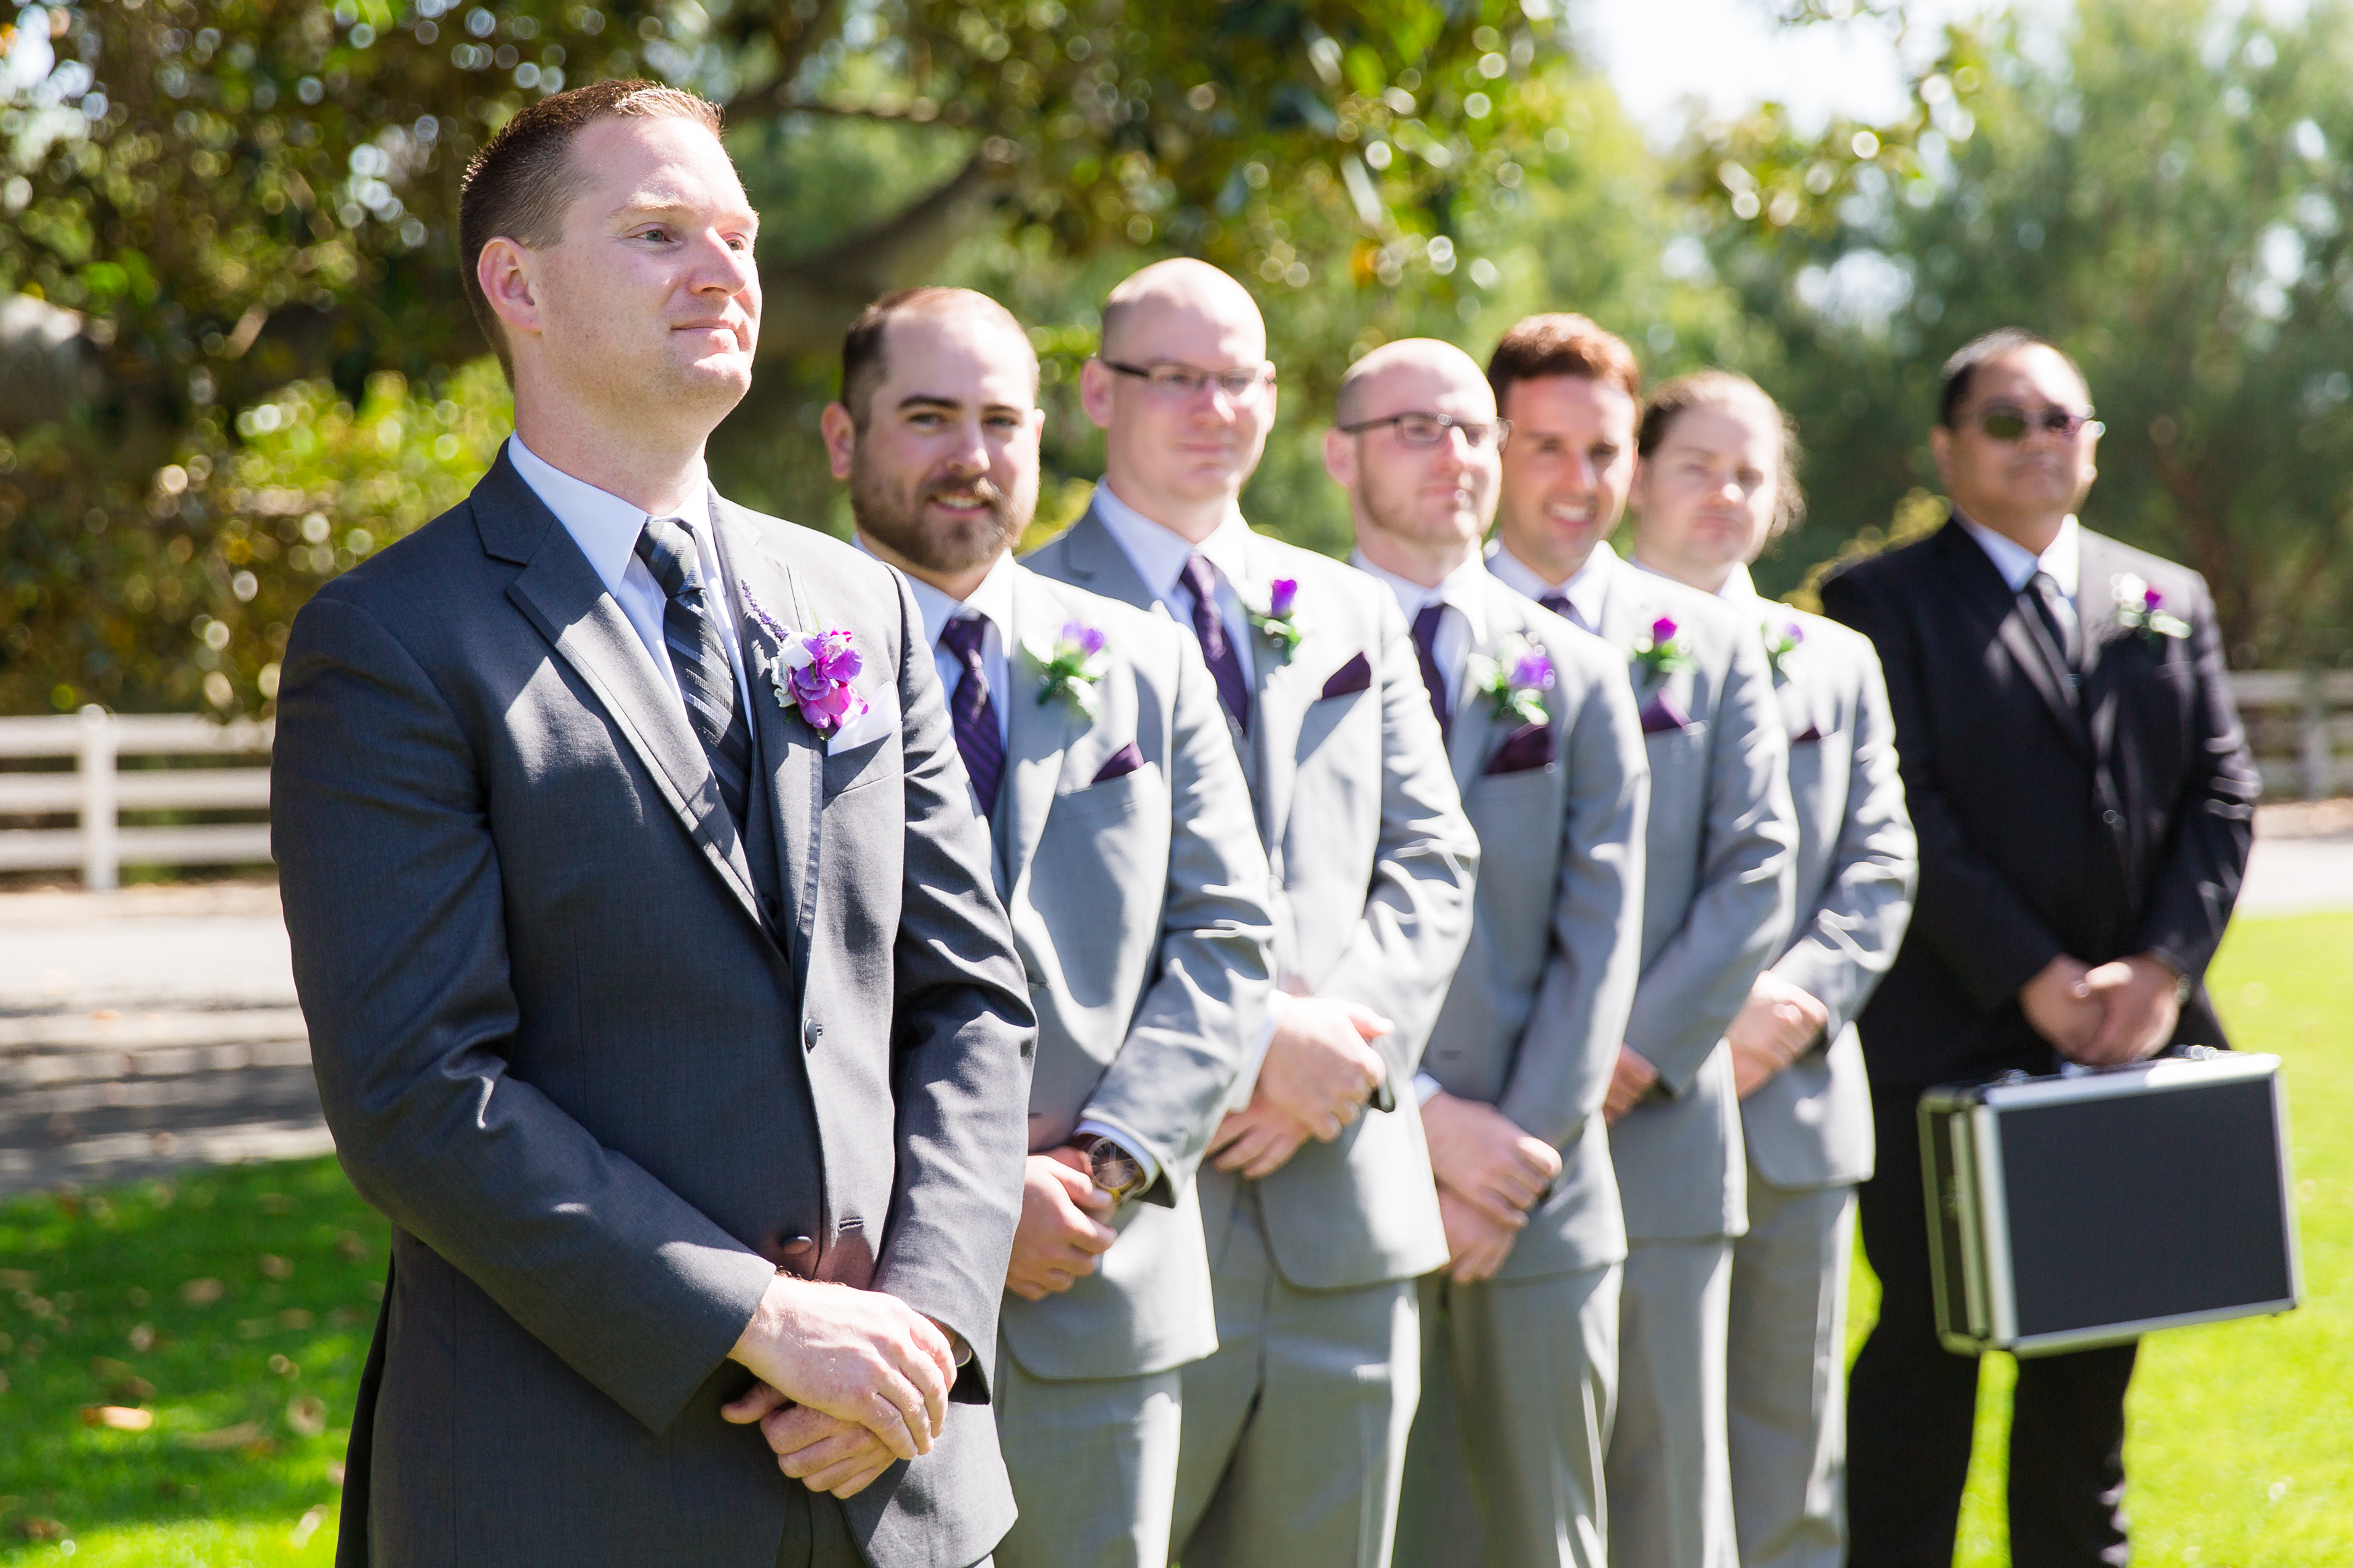 Groom looks emotionally at bride as she walks down the aisle